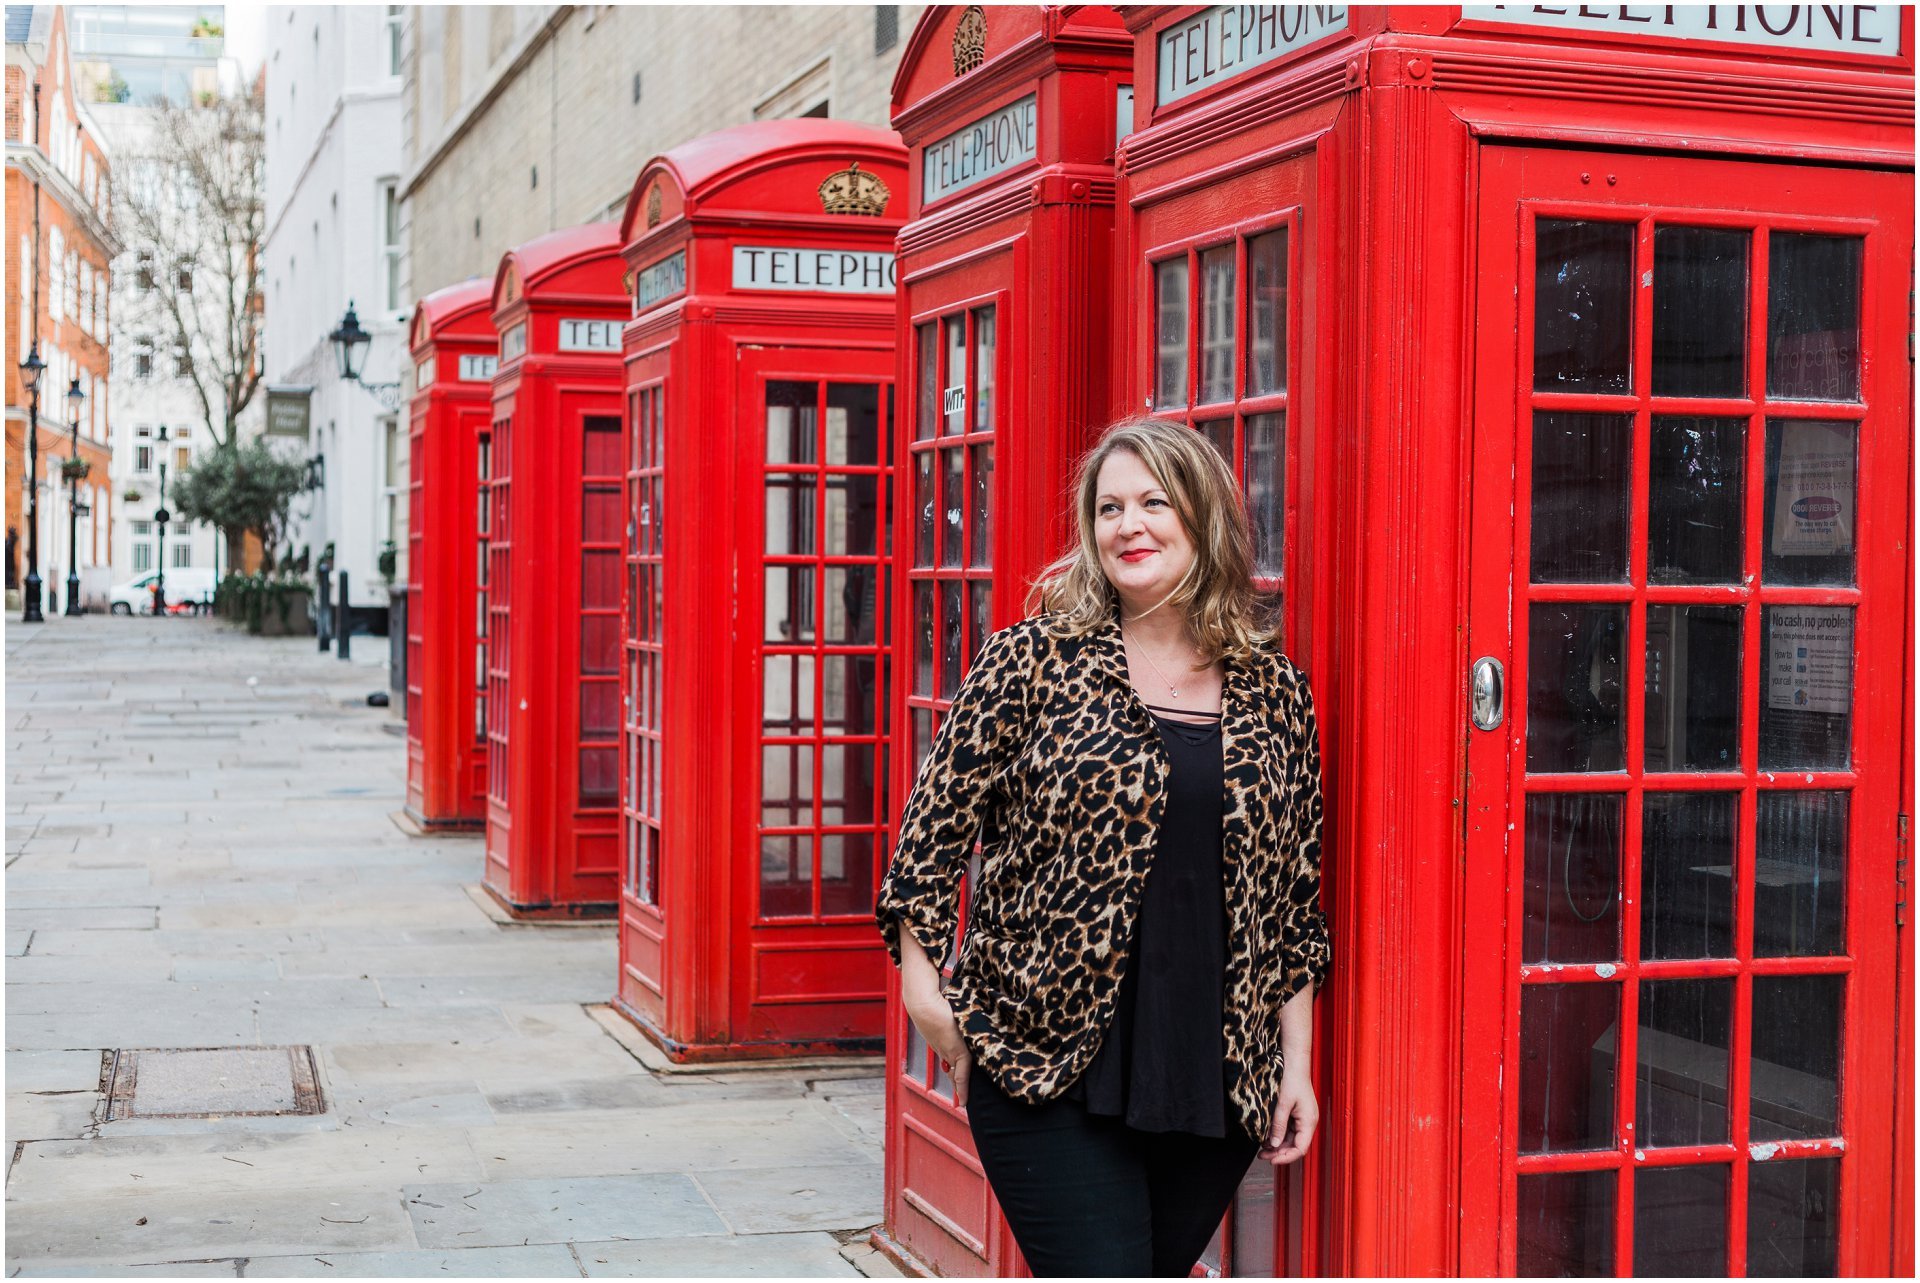 Claire Louise Branding on her London brand shoot near the Covent Garden red phone boxes. Images by London brand photographer AKP Branding Stories